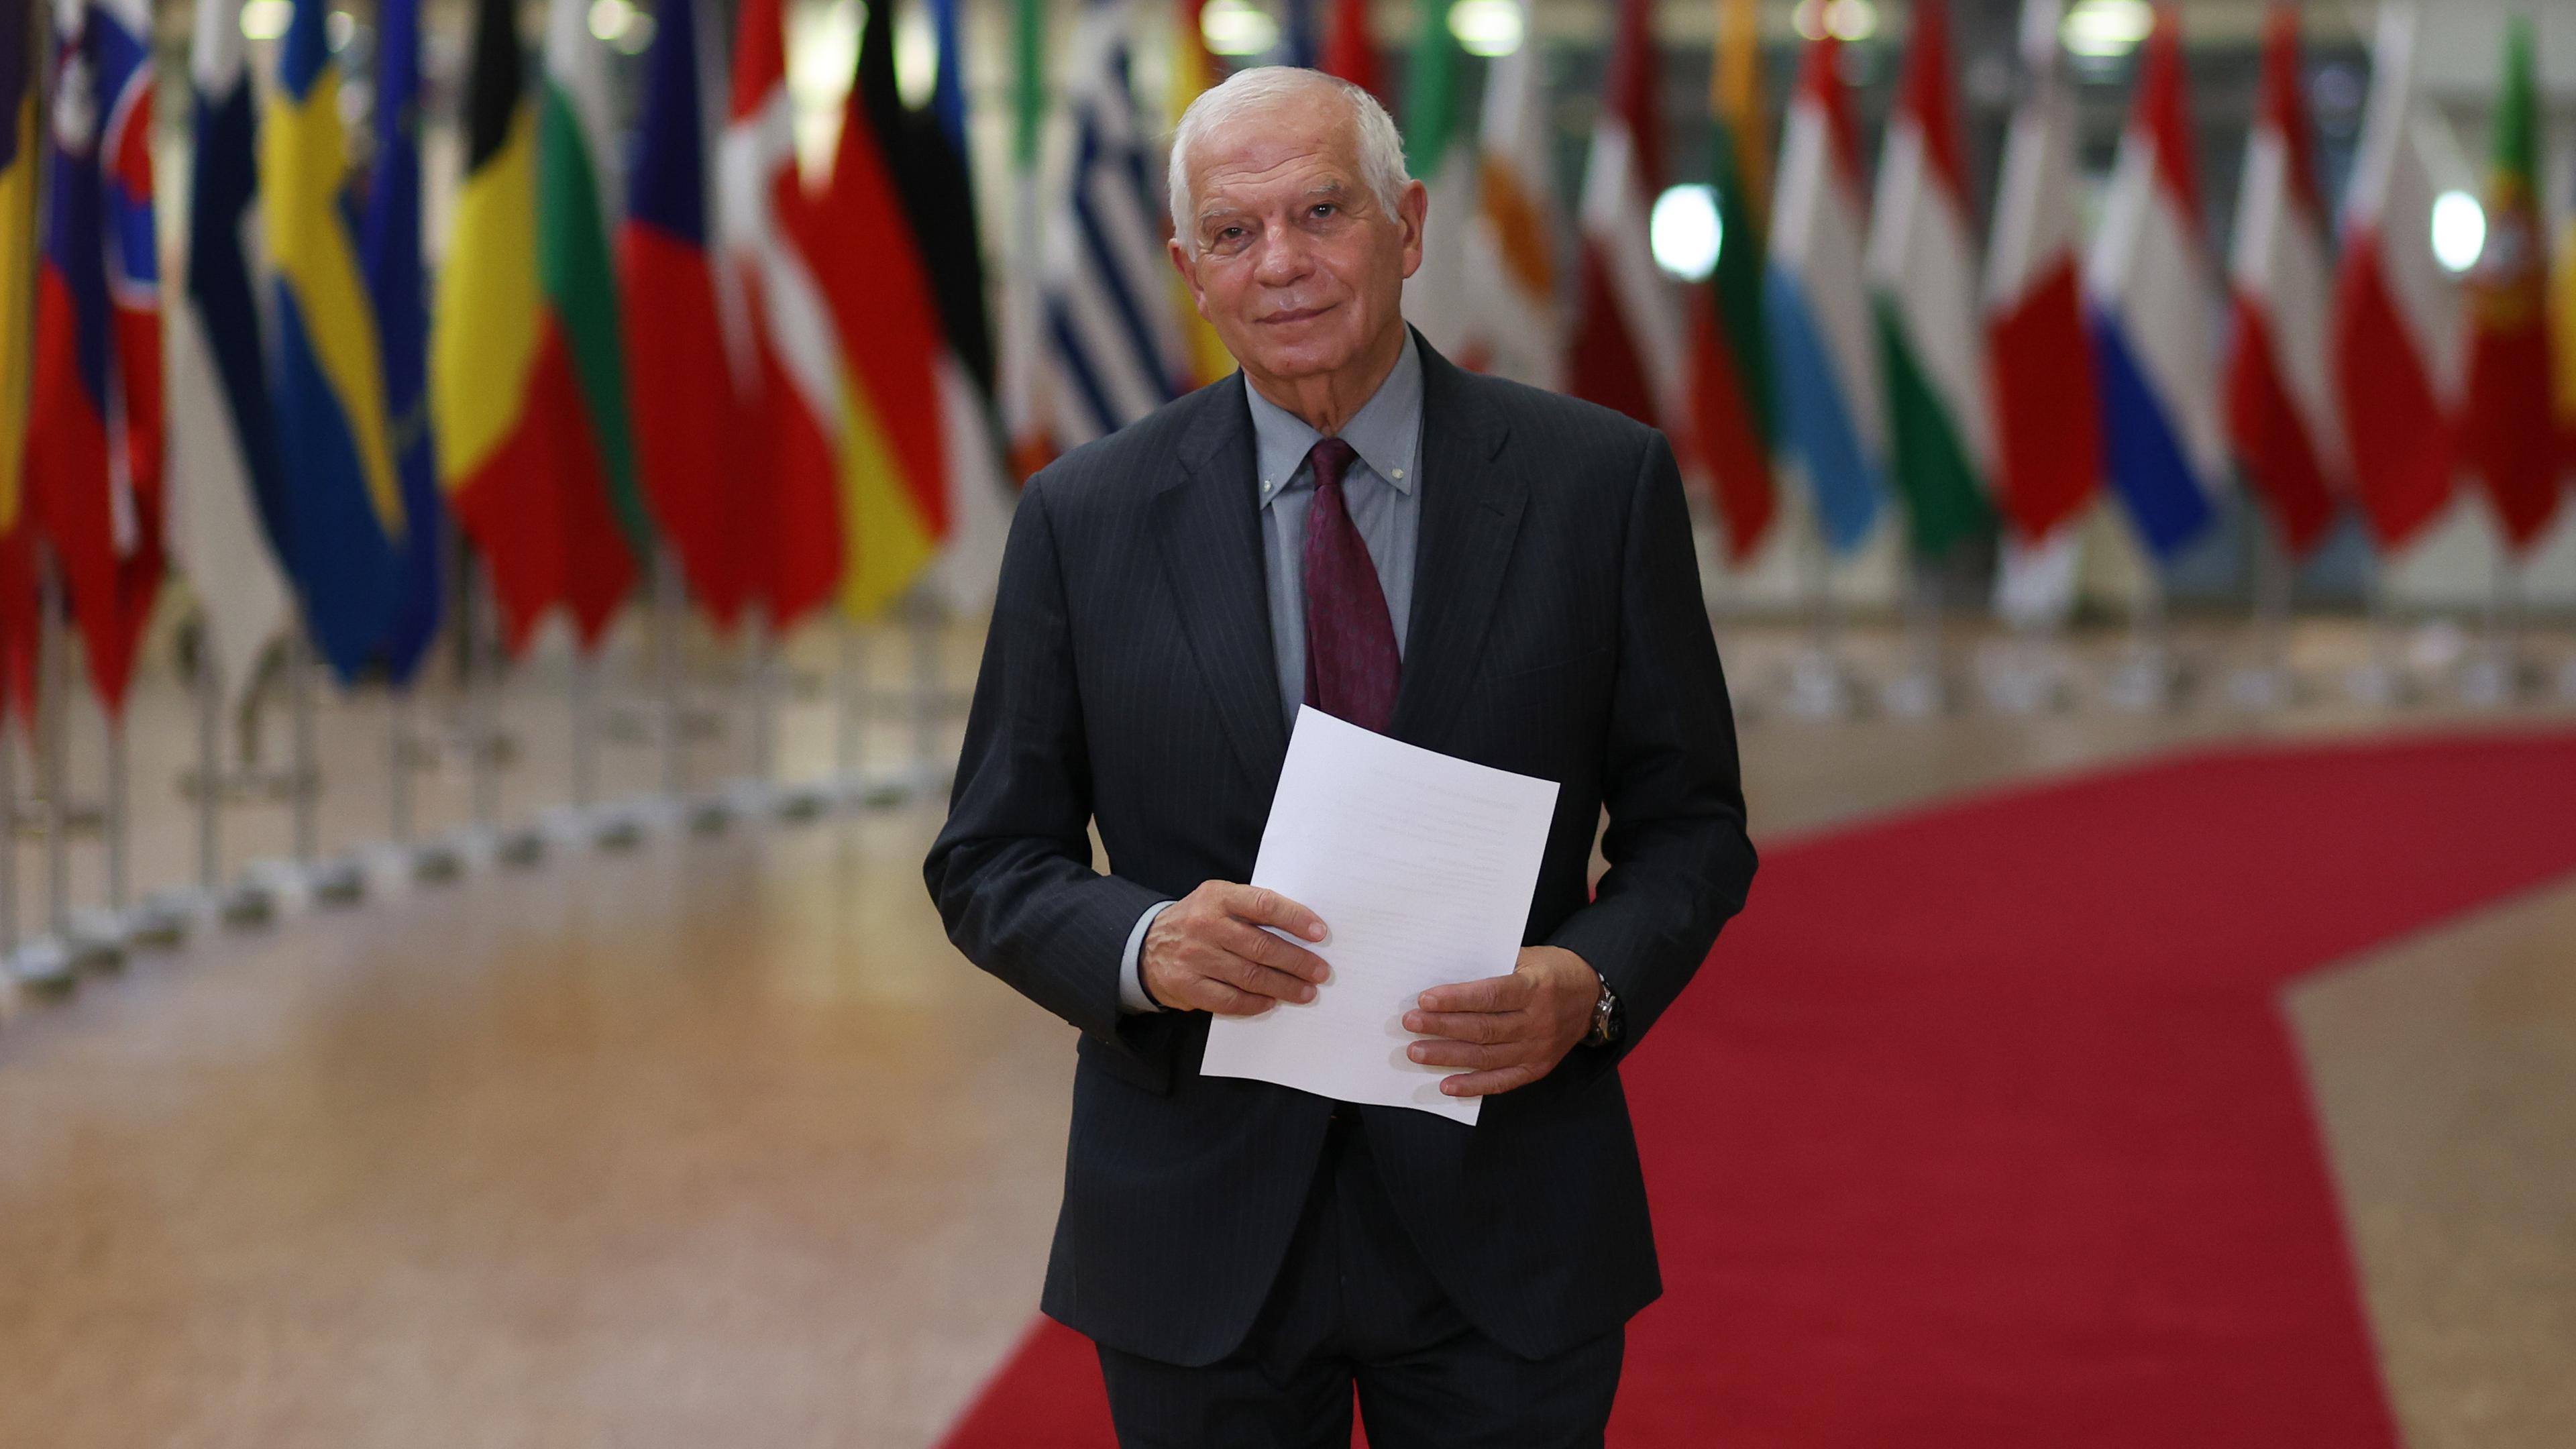  High Representative of the European Union for Foreign Affairs and Security Policy Josep Borrell arrives prior the start of a European Defence ministers council meeting in Brussels, Belgium, 14 November 2023.